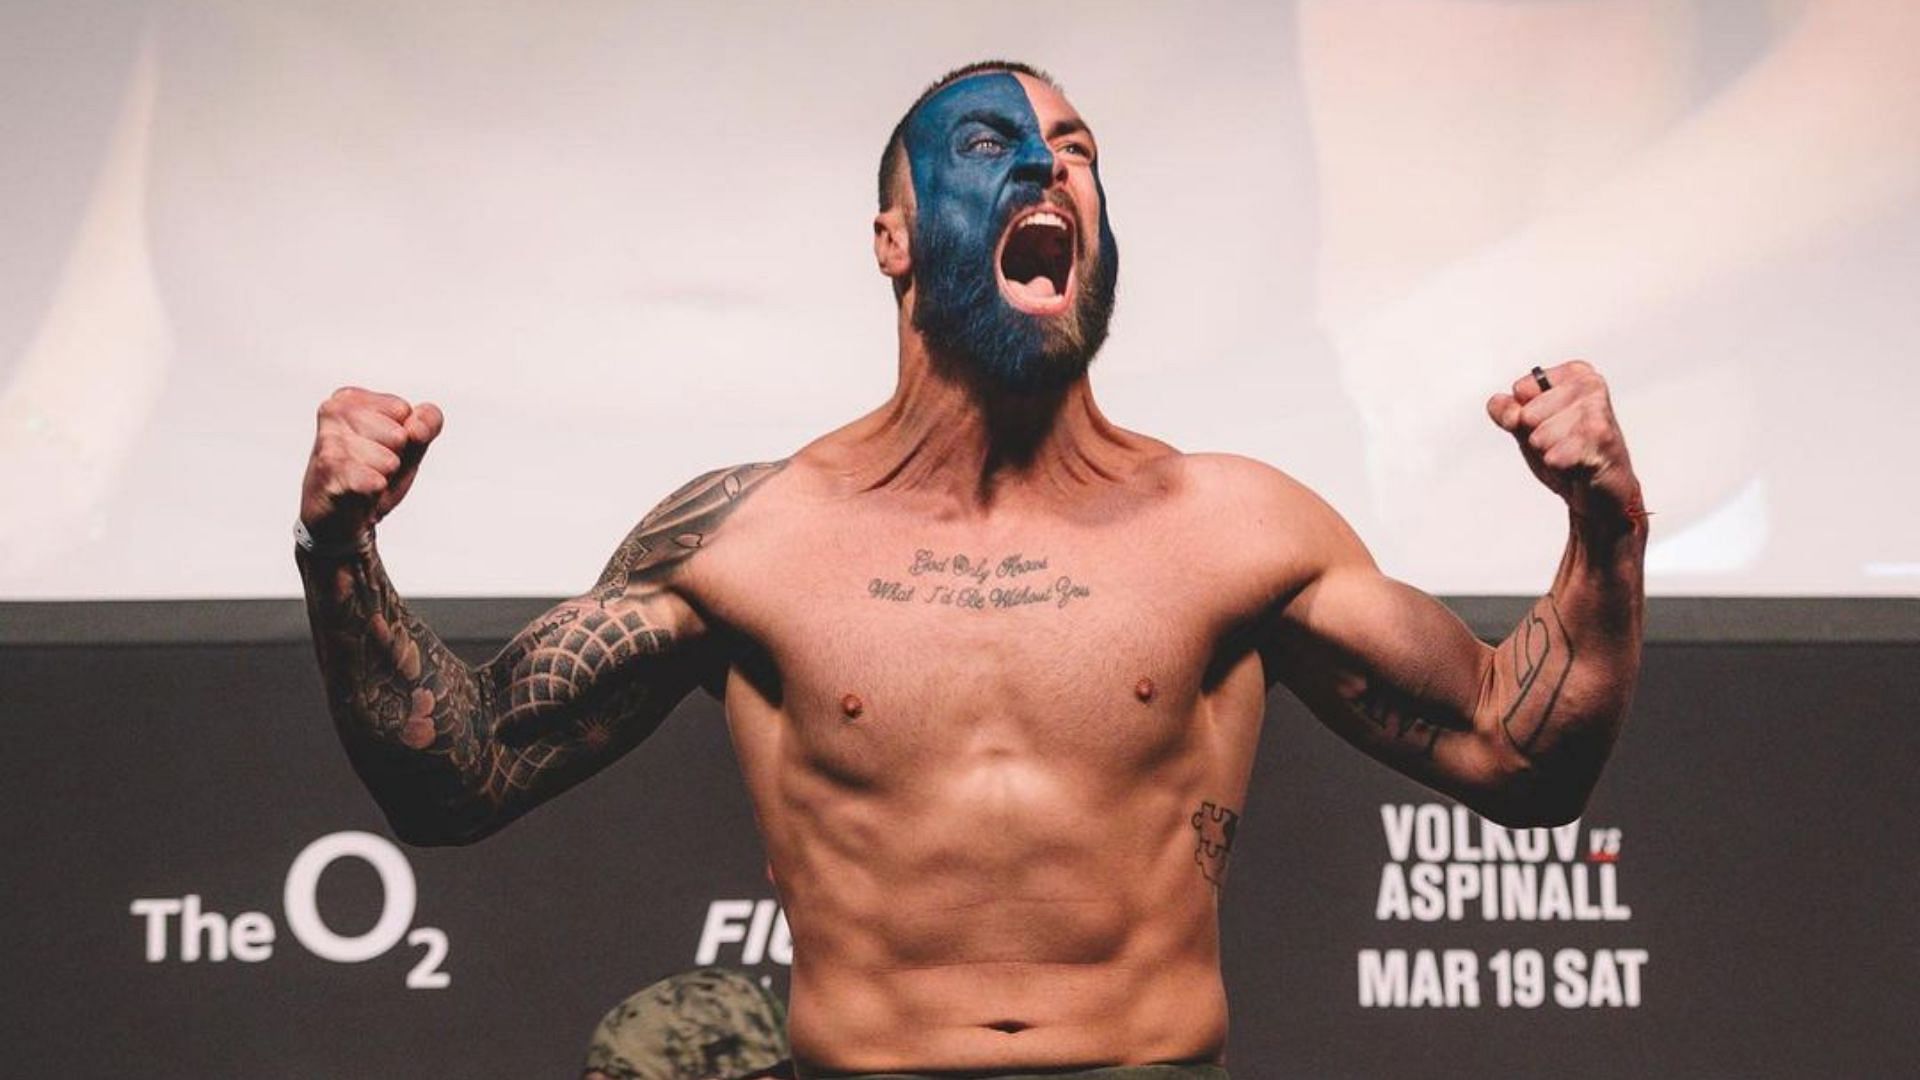 Paul Craig during on of his pre-fight weigh-ins [Image courtesy @paulcraig on Instagram]